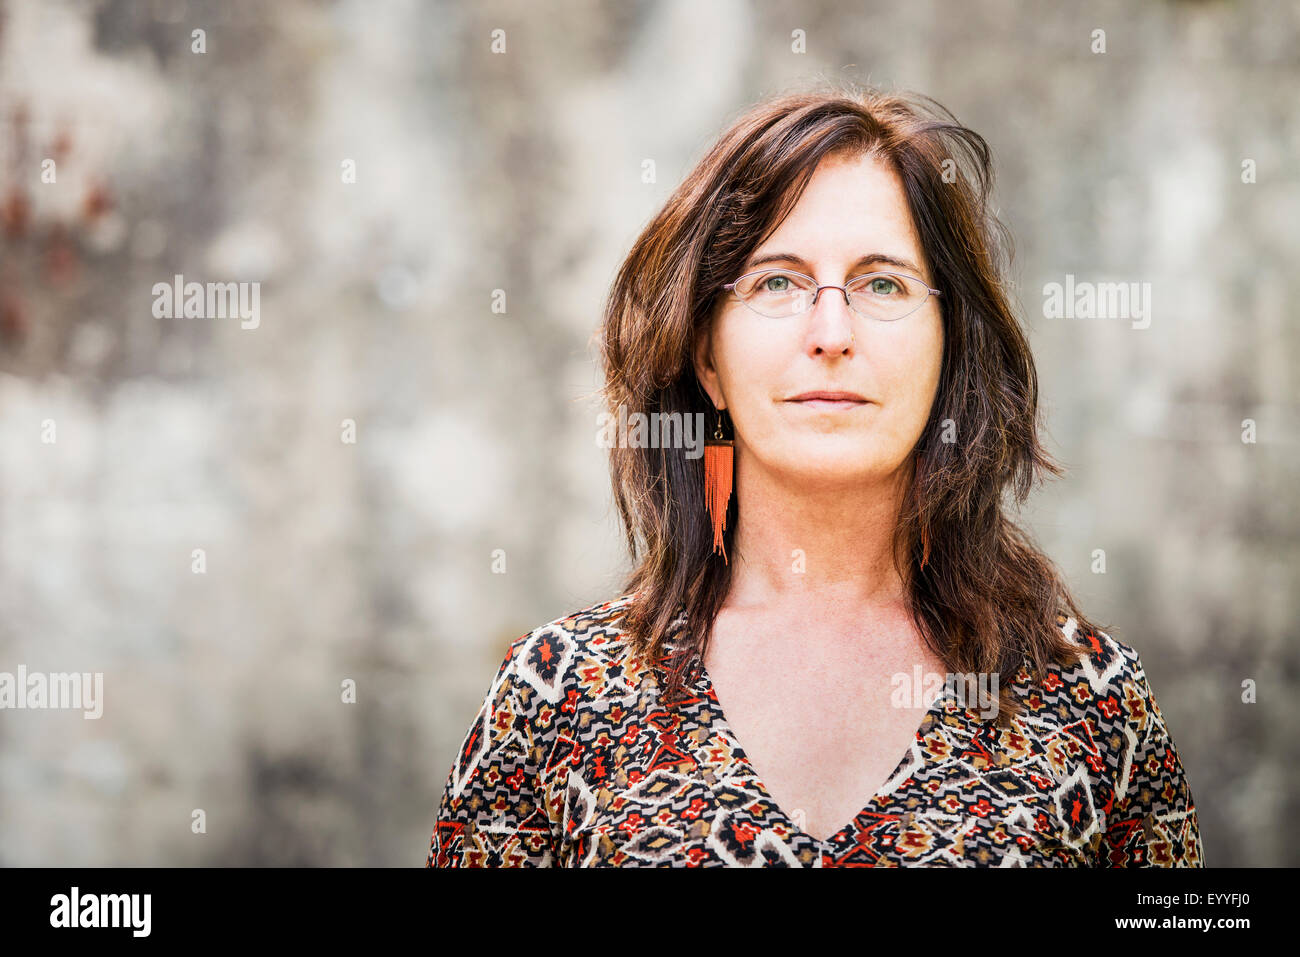 Close up of Caucasian woman with serious expression Stock Photo